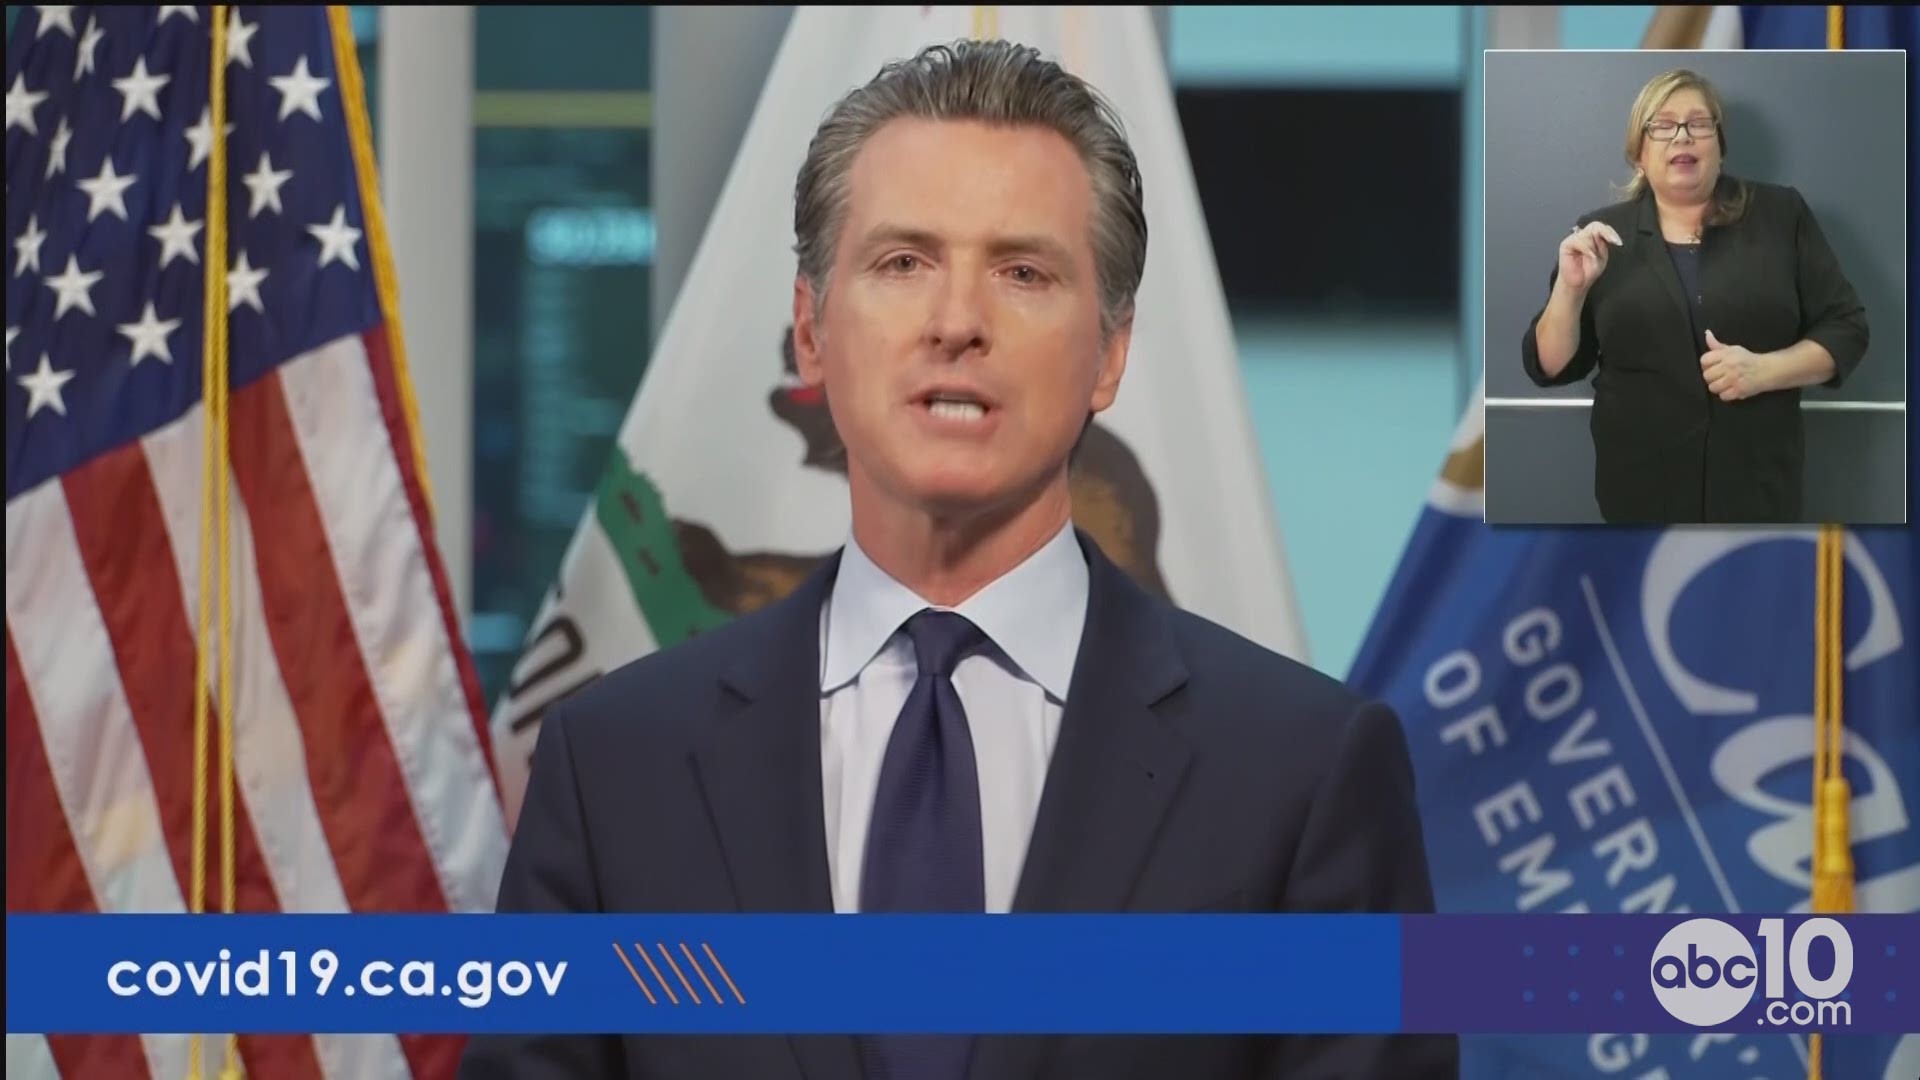 Governor Newsom announces partnership with Bitwise to create site, OnwardCA.org to help unemployed get up off their feet during coronavirus pandemic.